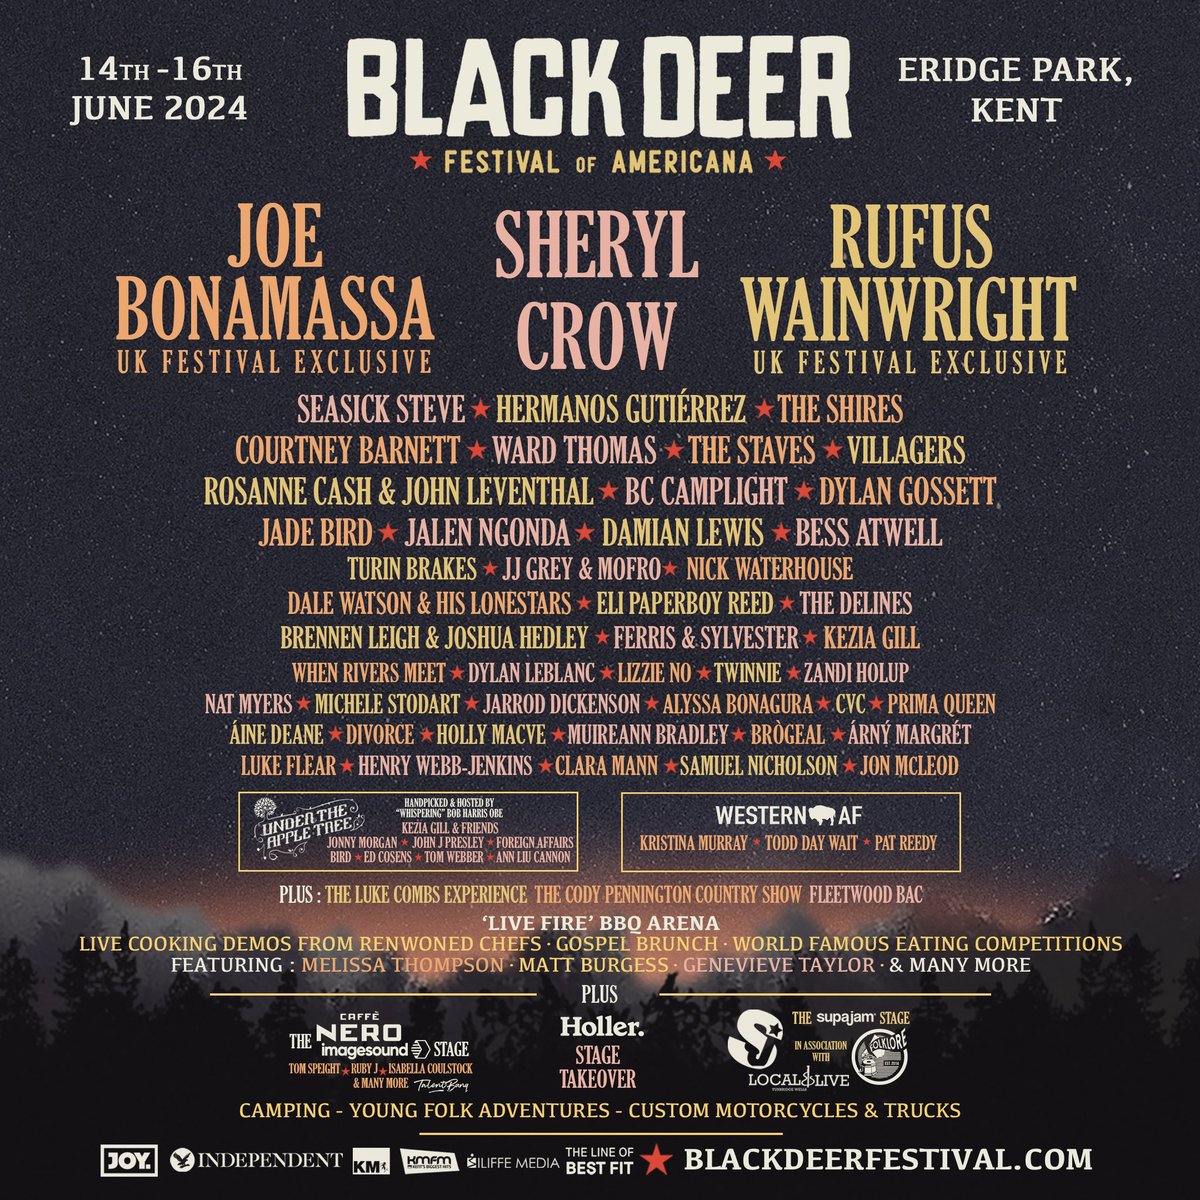 Thrilled to be performing at @blackdeerfest in June in some major company..

See you out front! ✌️